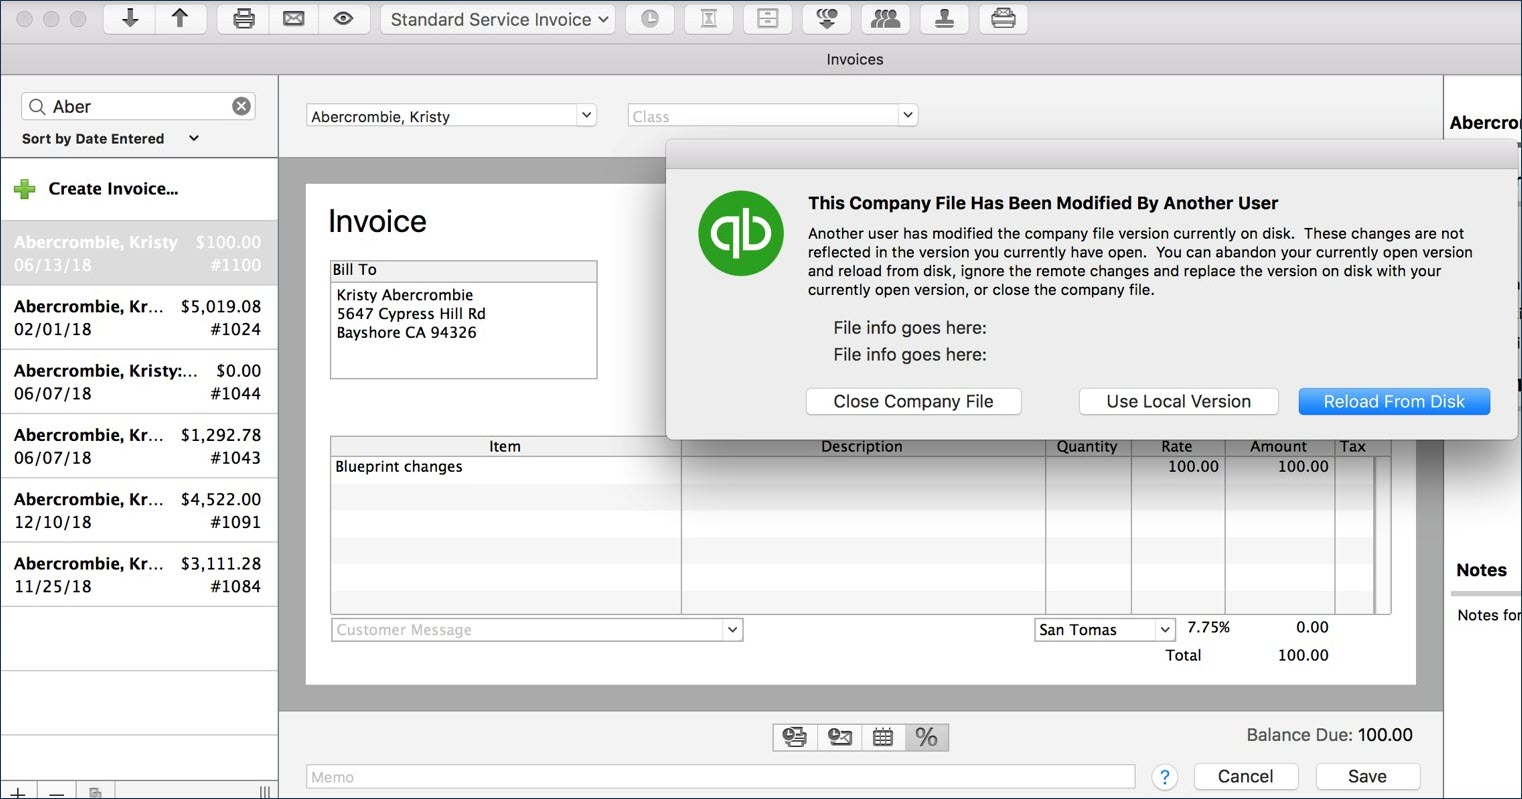 move quickbooks for mac to a different computger